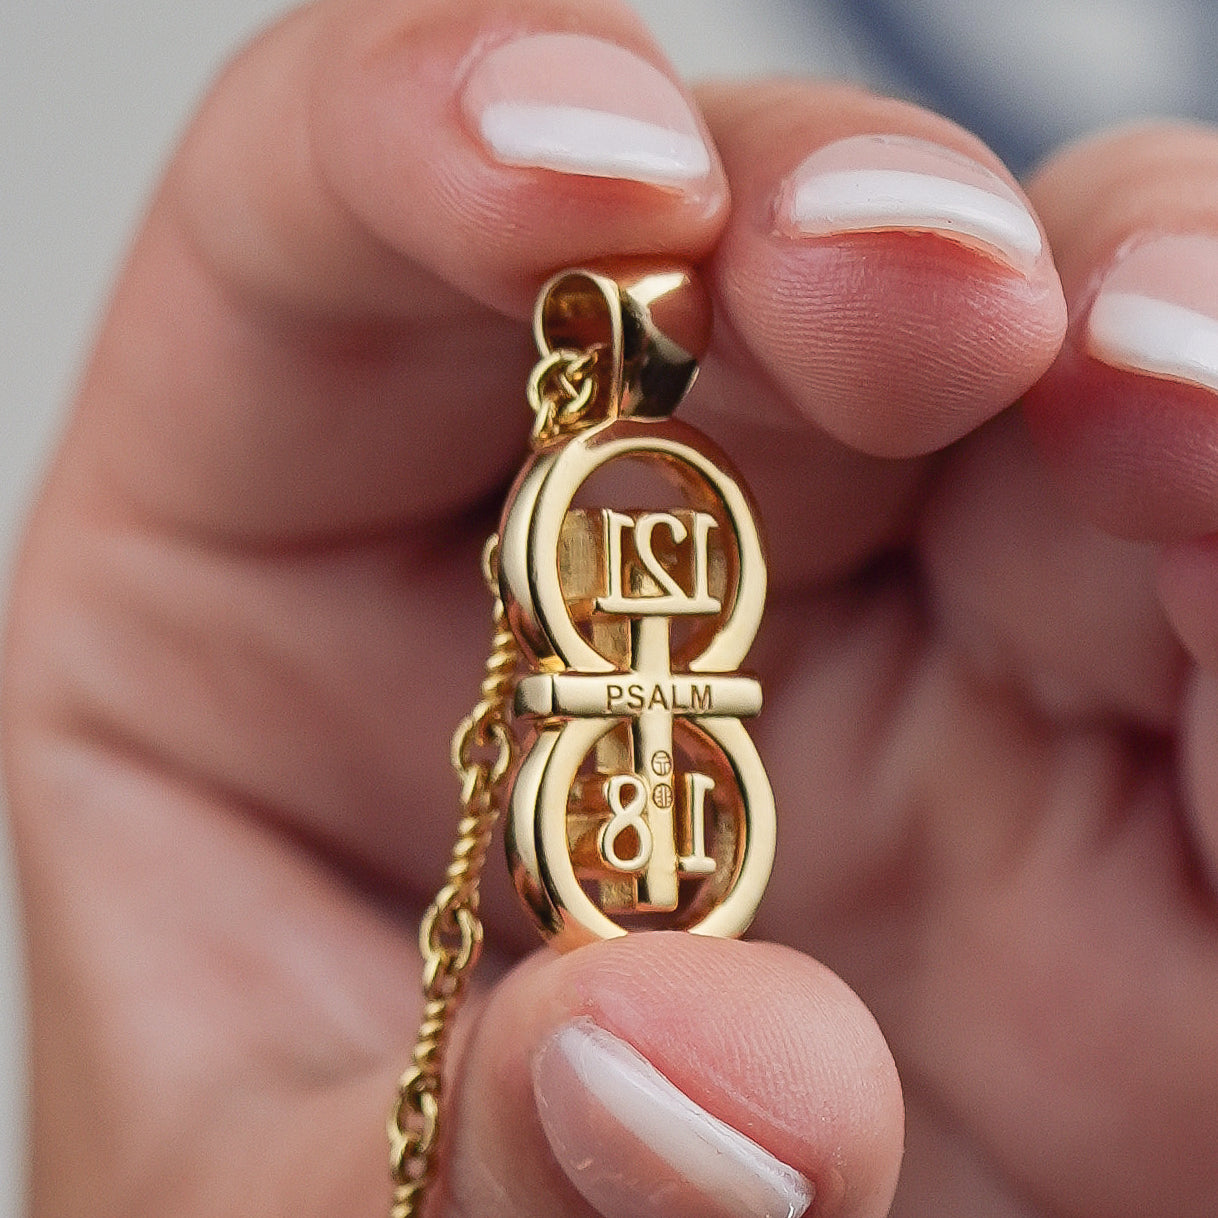 Our gold large pendant with the back displayed to show engraving detail on a white background held between two fingers for size reference.The RIYAN 29 and 11® pendant has the numbers 121, 1, and 8 intertwined with the cross to represent Psalm 121:1-8 with the chapter word "Psalm" inscribed on the back.